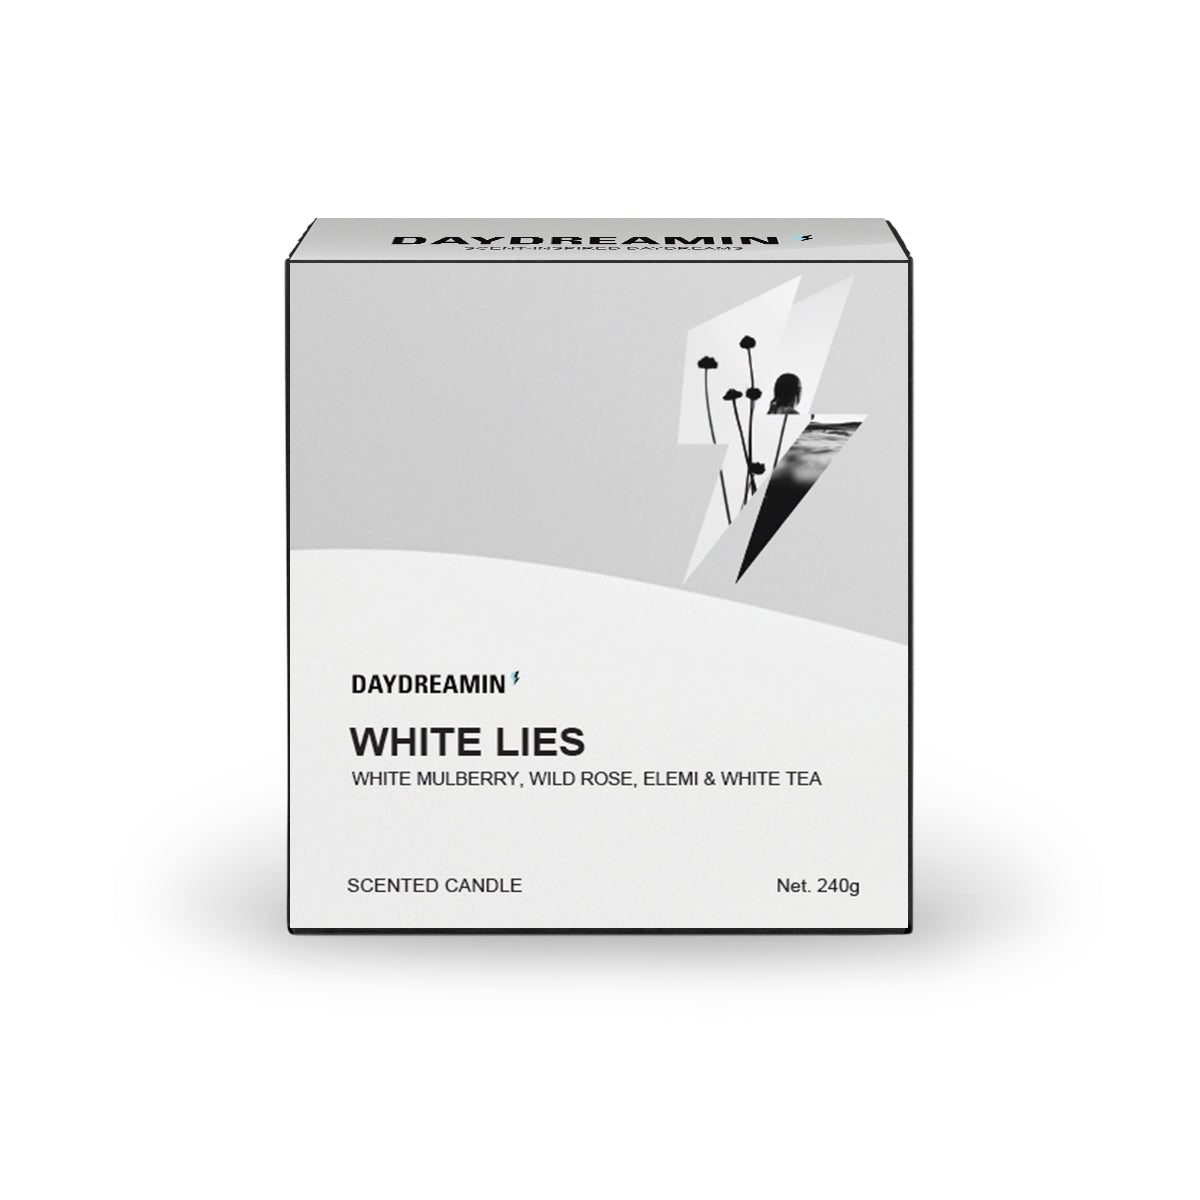 Daydreamin_White Lies_Scented_Candle UK_Gift Box